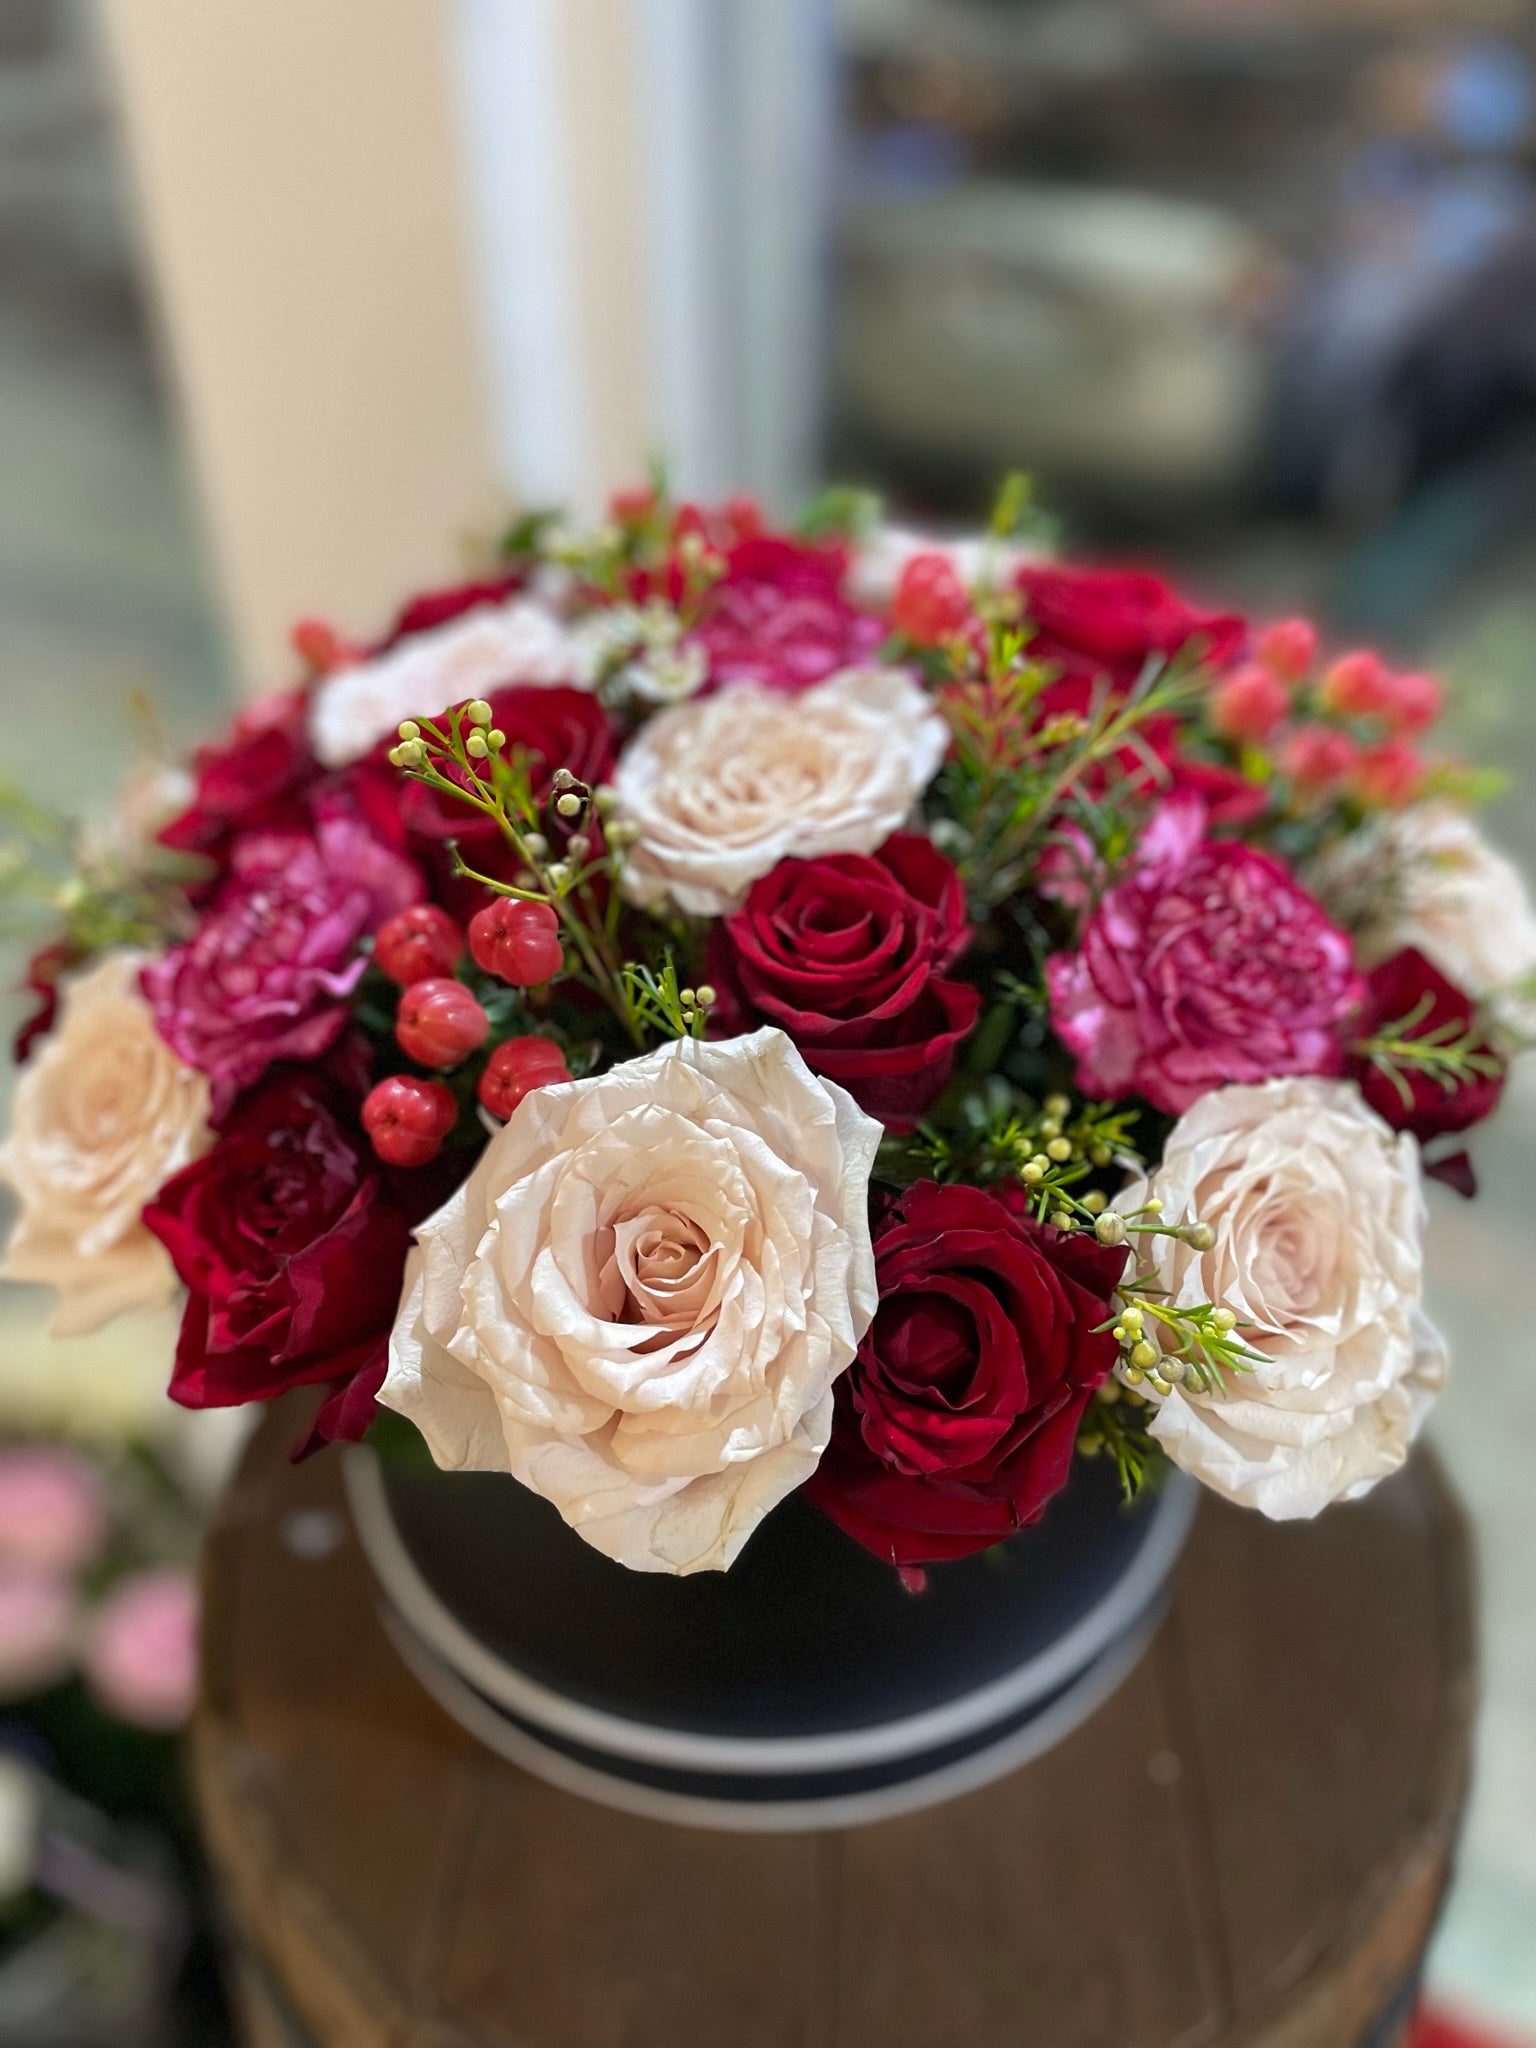 Mixed red and cream roses